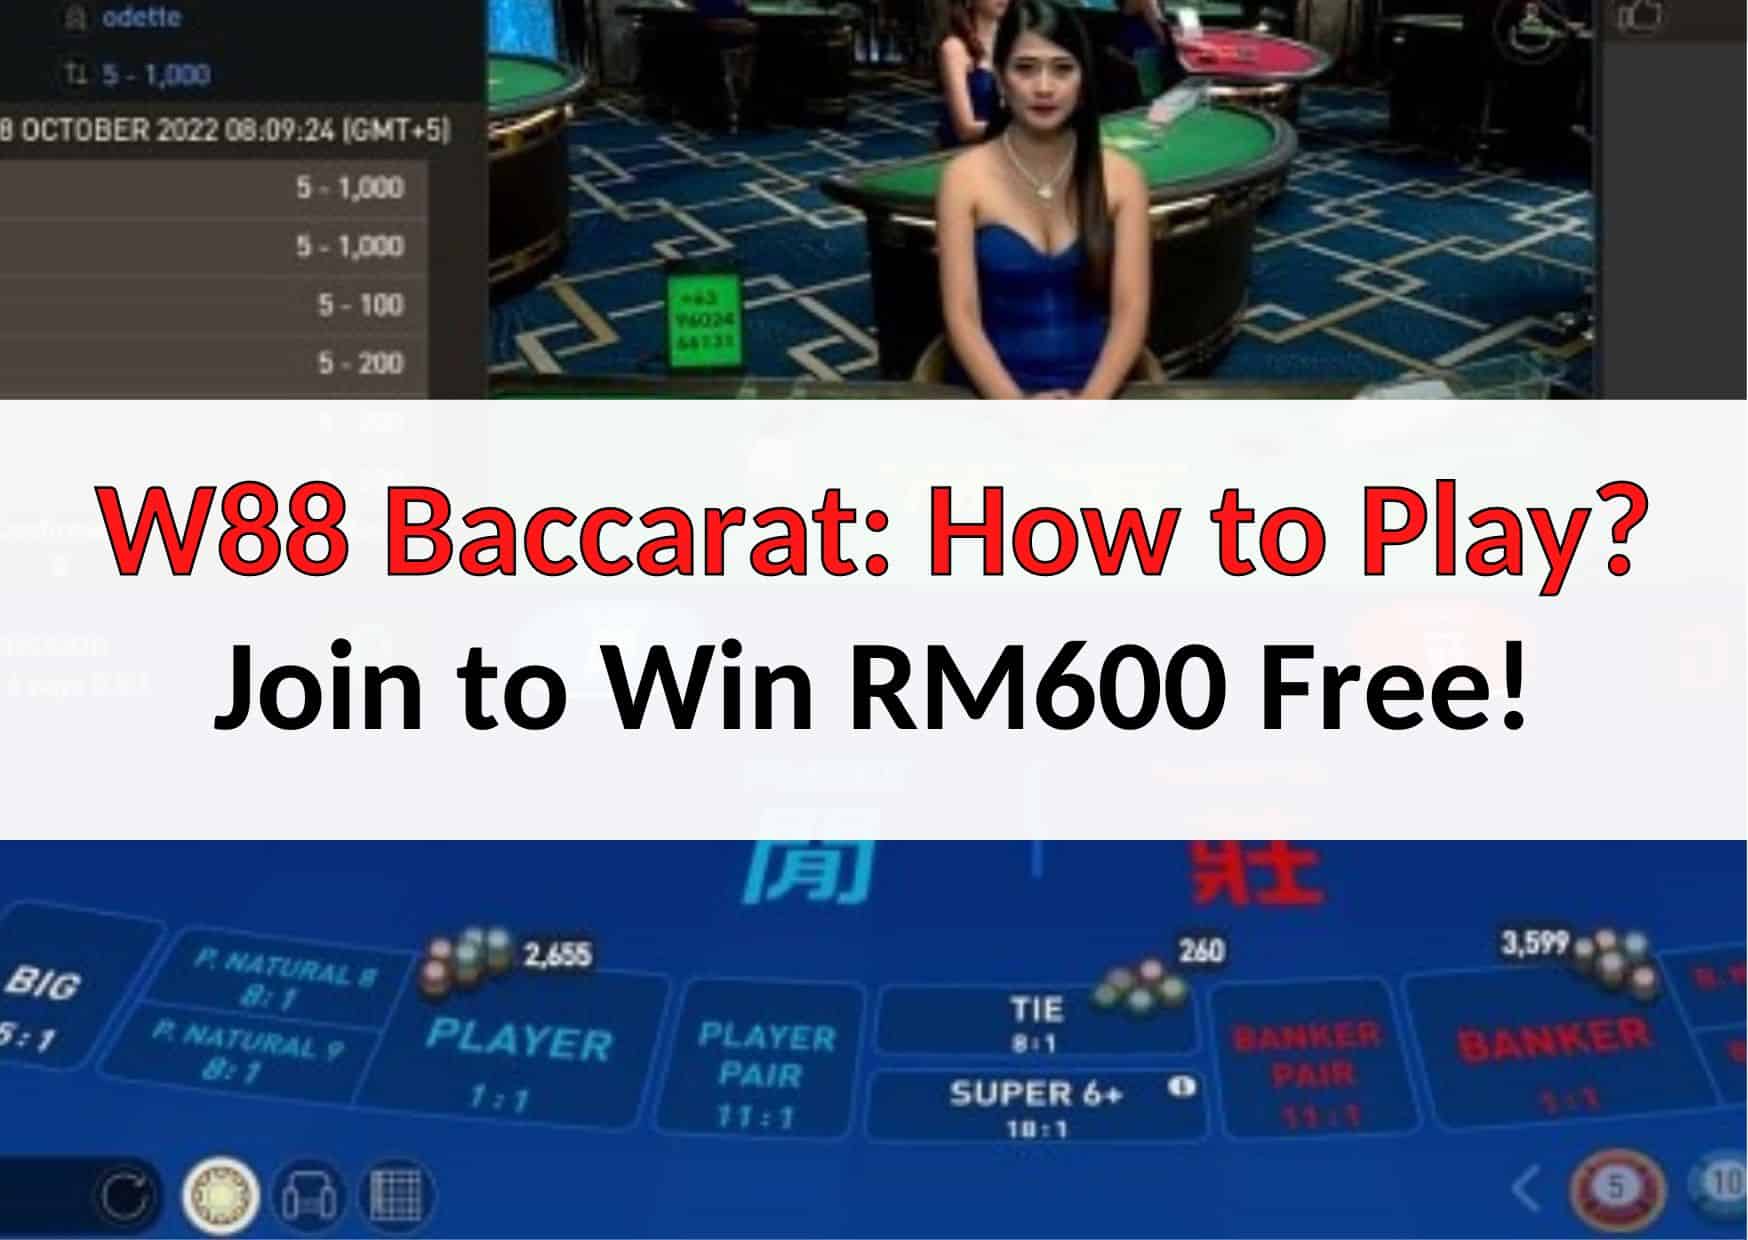 w88-Baccarat-how-to-play-001